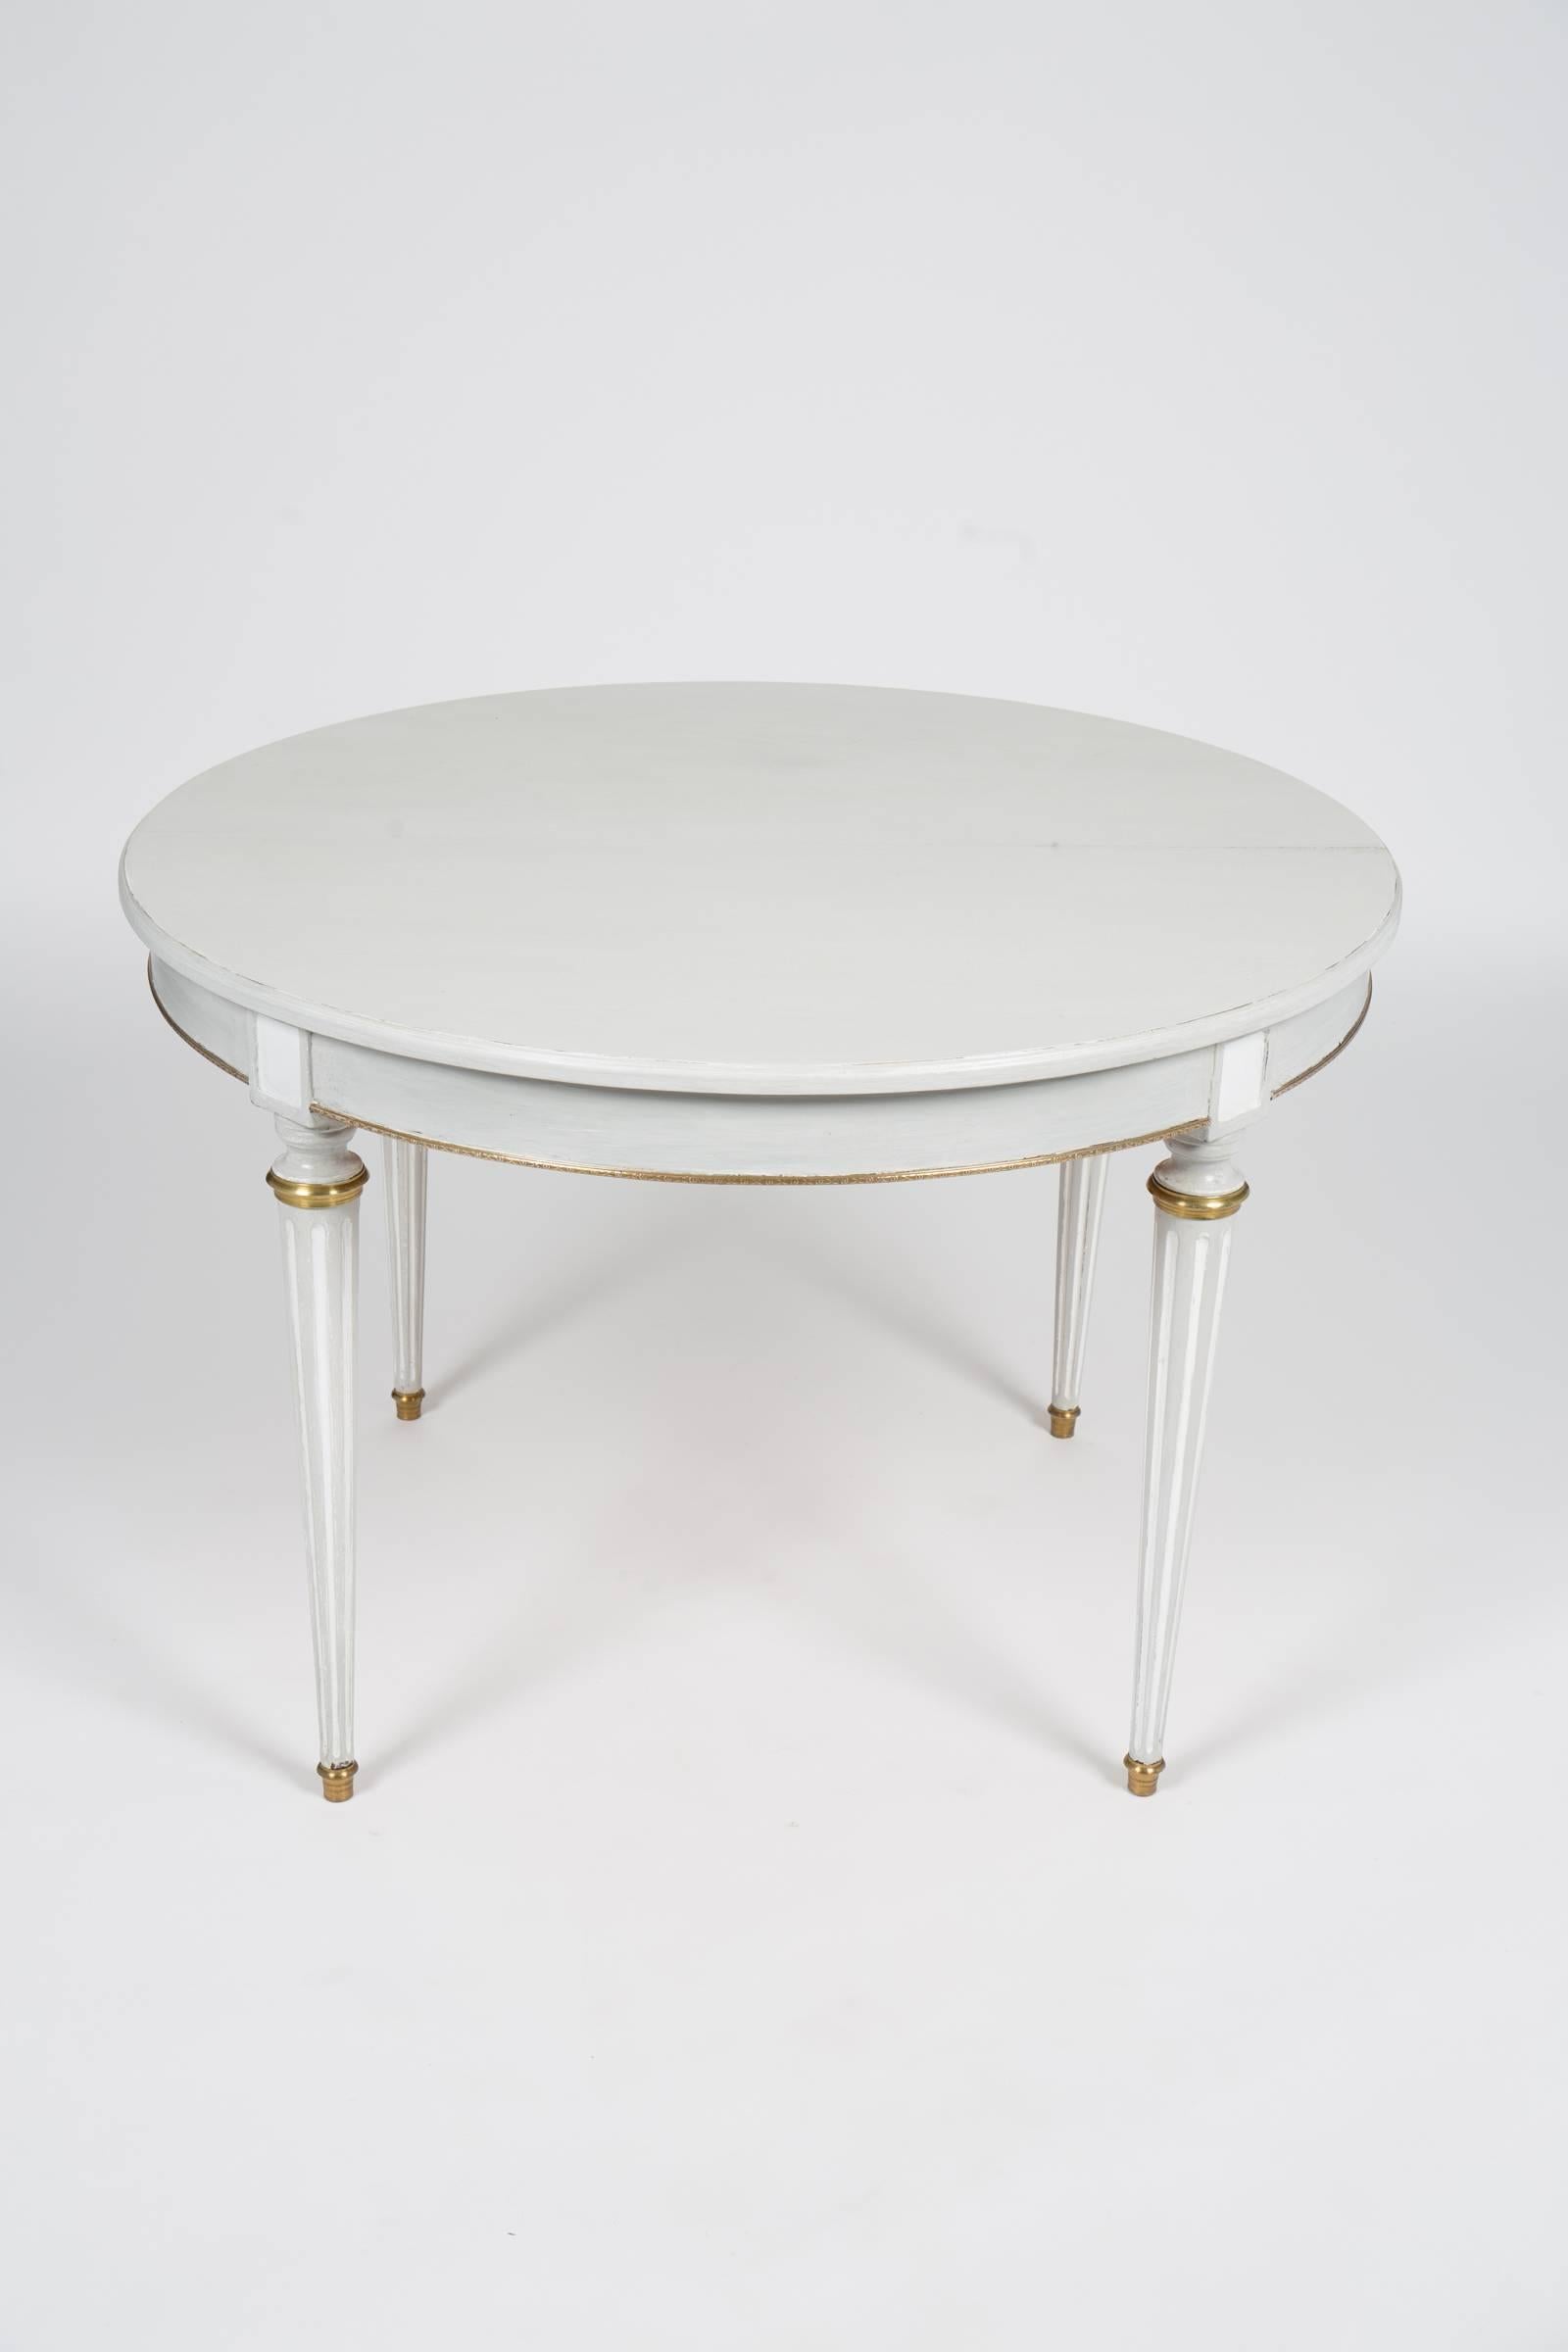 Gilt Louis XVI Style Painted French Game Table